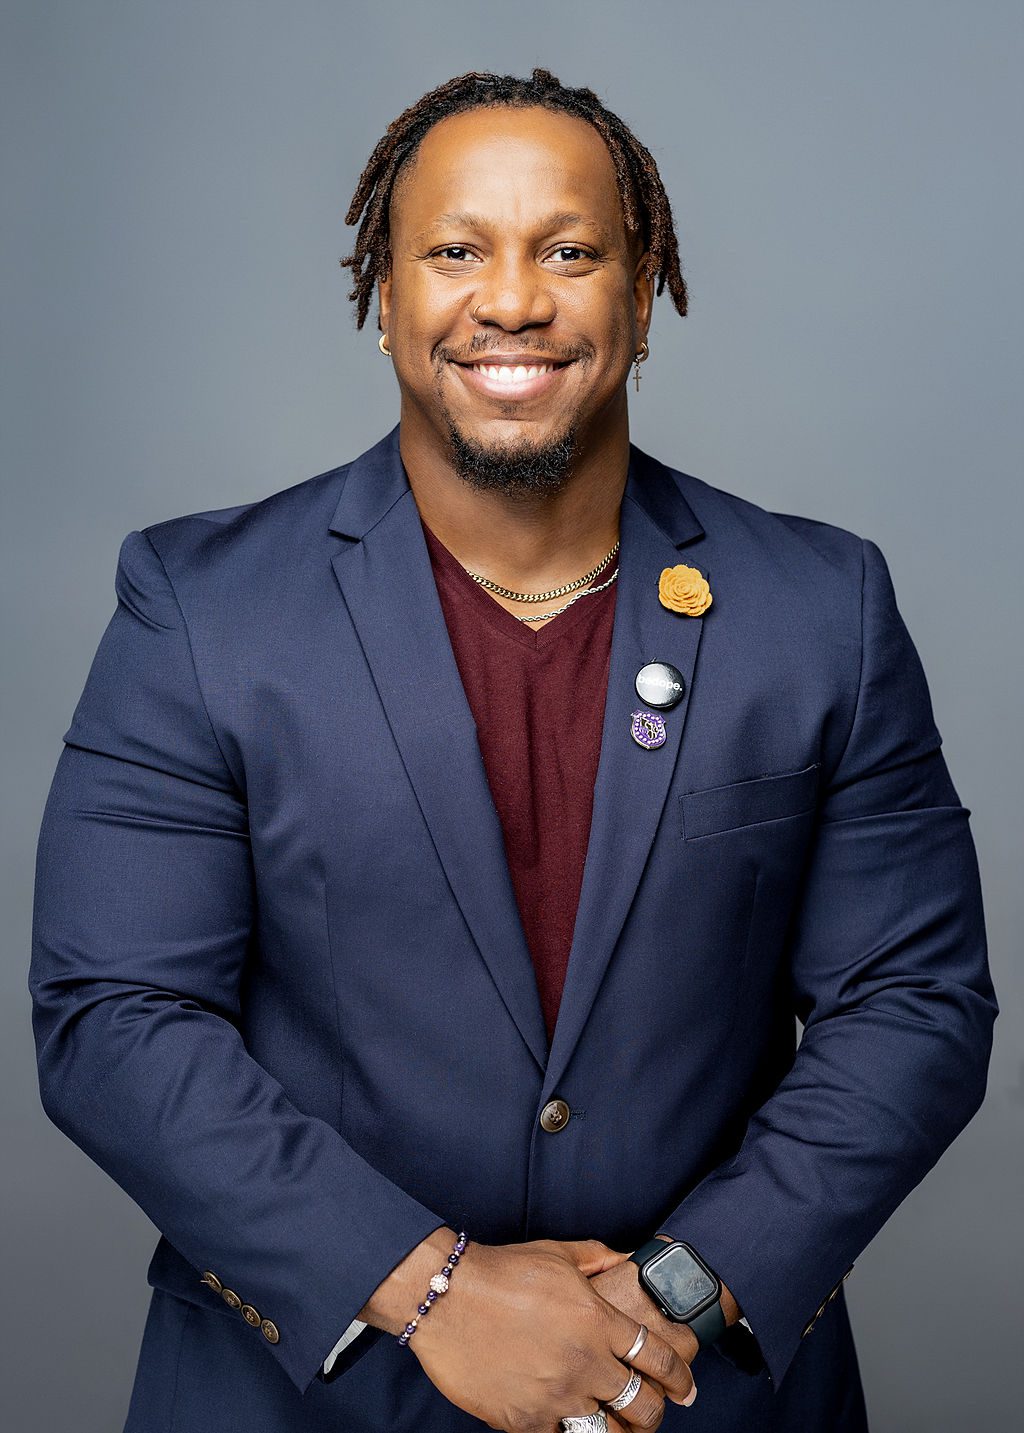 This photo is a professional headshot of Dyryl Burnett. He is a Black man with short dark brown locs. He is wearing a maroon t-shirt with a dark blue blazer closed over the top of it. On the left lapel of his blazer, there are three pins: a yellow flower, a black-and-white pin that says "be dope", and a Omega Psi Phi Fraternity crest. He is wearing two simple chains around his neck, one silver and one gold, and has two gold earrings on -- one of the earrings is a cross. Lastly, on his wrists, he is wearing a black smartwatch and a simple beaded bracelet. He is smiling and his arms are relaxed to his side with his hands clasped in front of his waist.